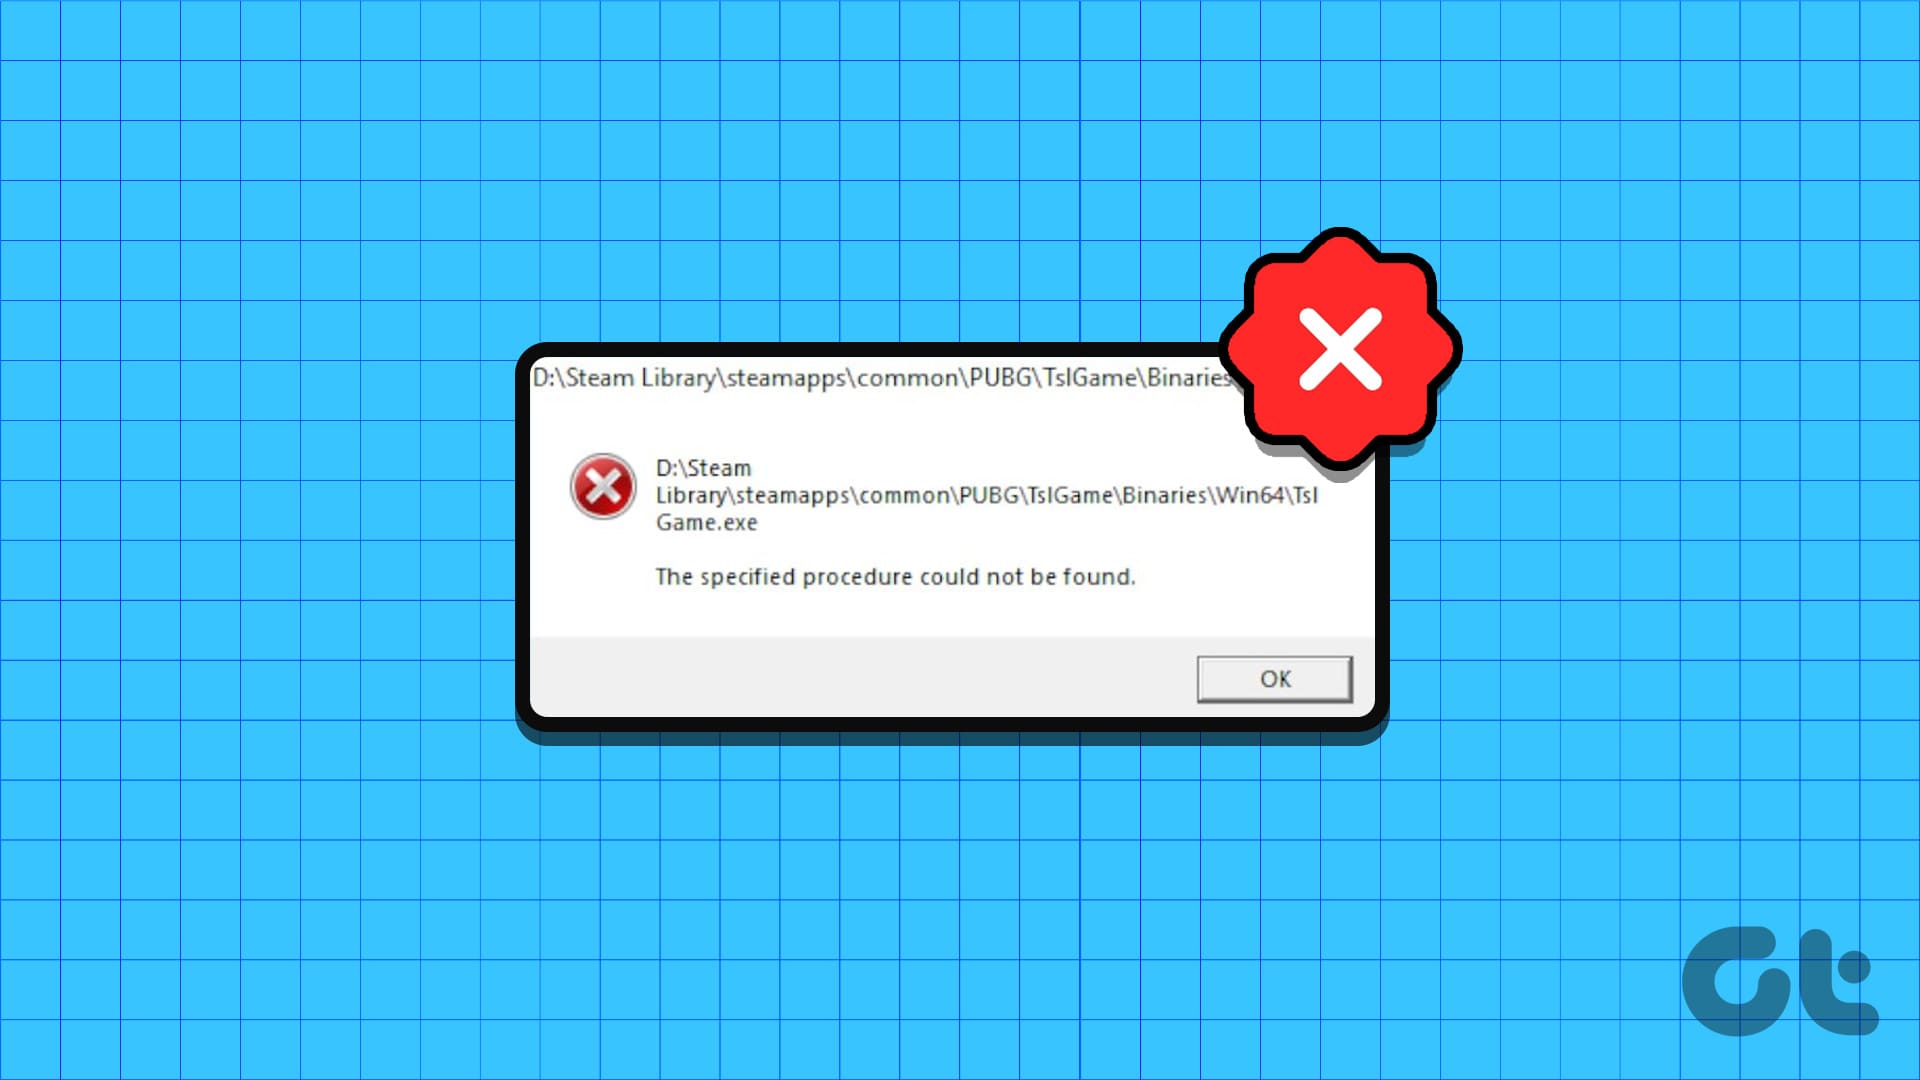 Top Fixes for the Specified Procedure Could Not Be Found Error in Windows